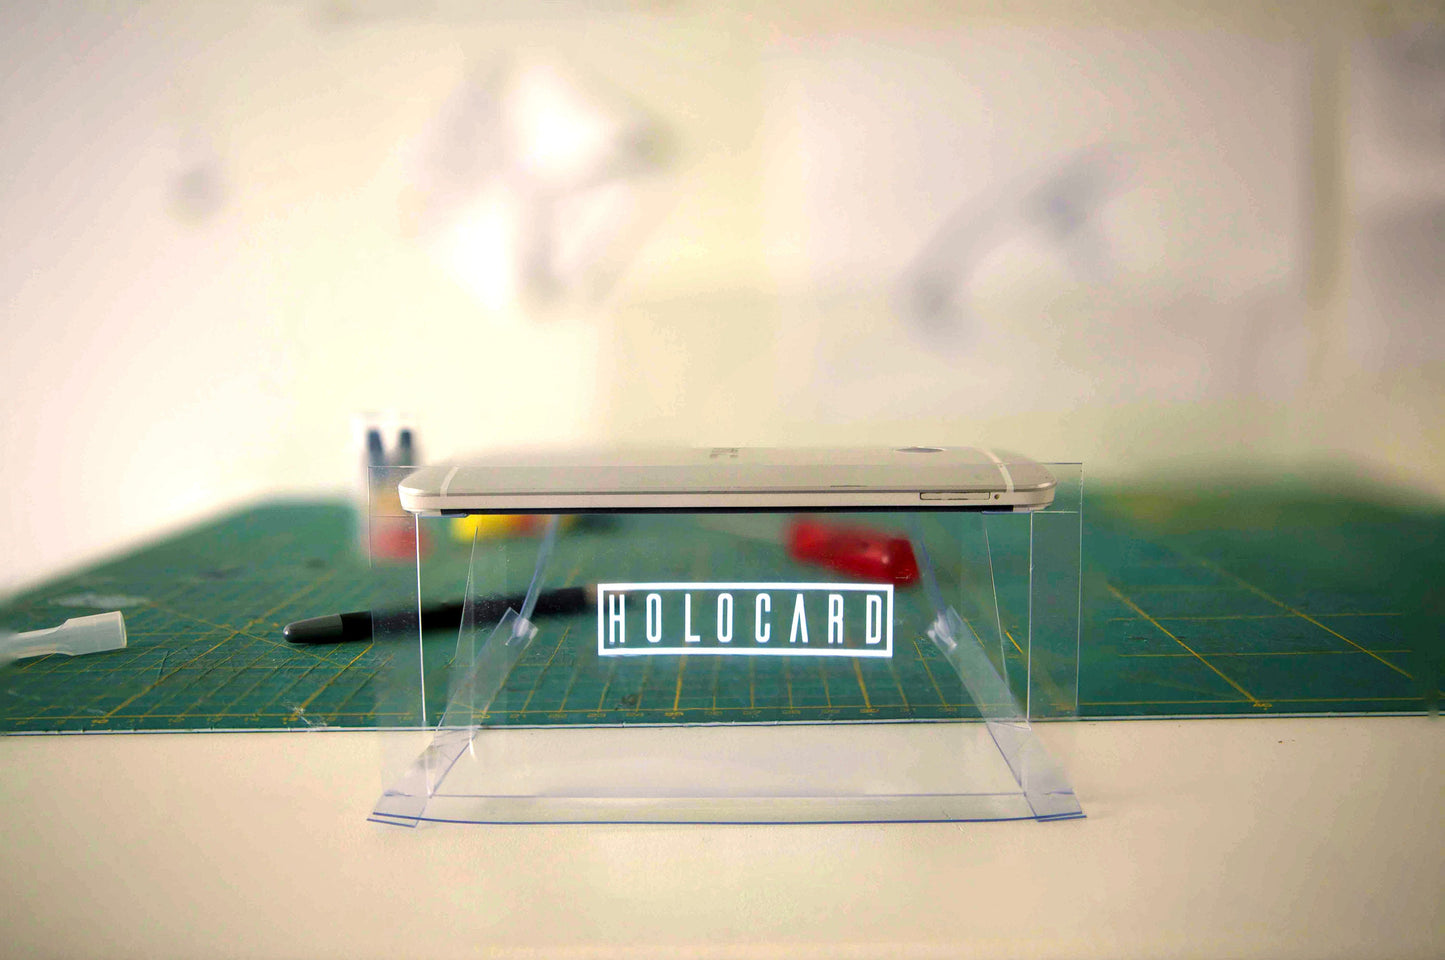 HOLOCARD 3-pack | Hologram display for smartphones | Use this new tech gadget to see holograms with your smartphone